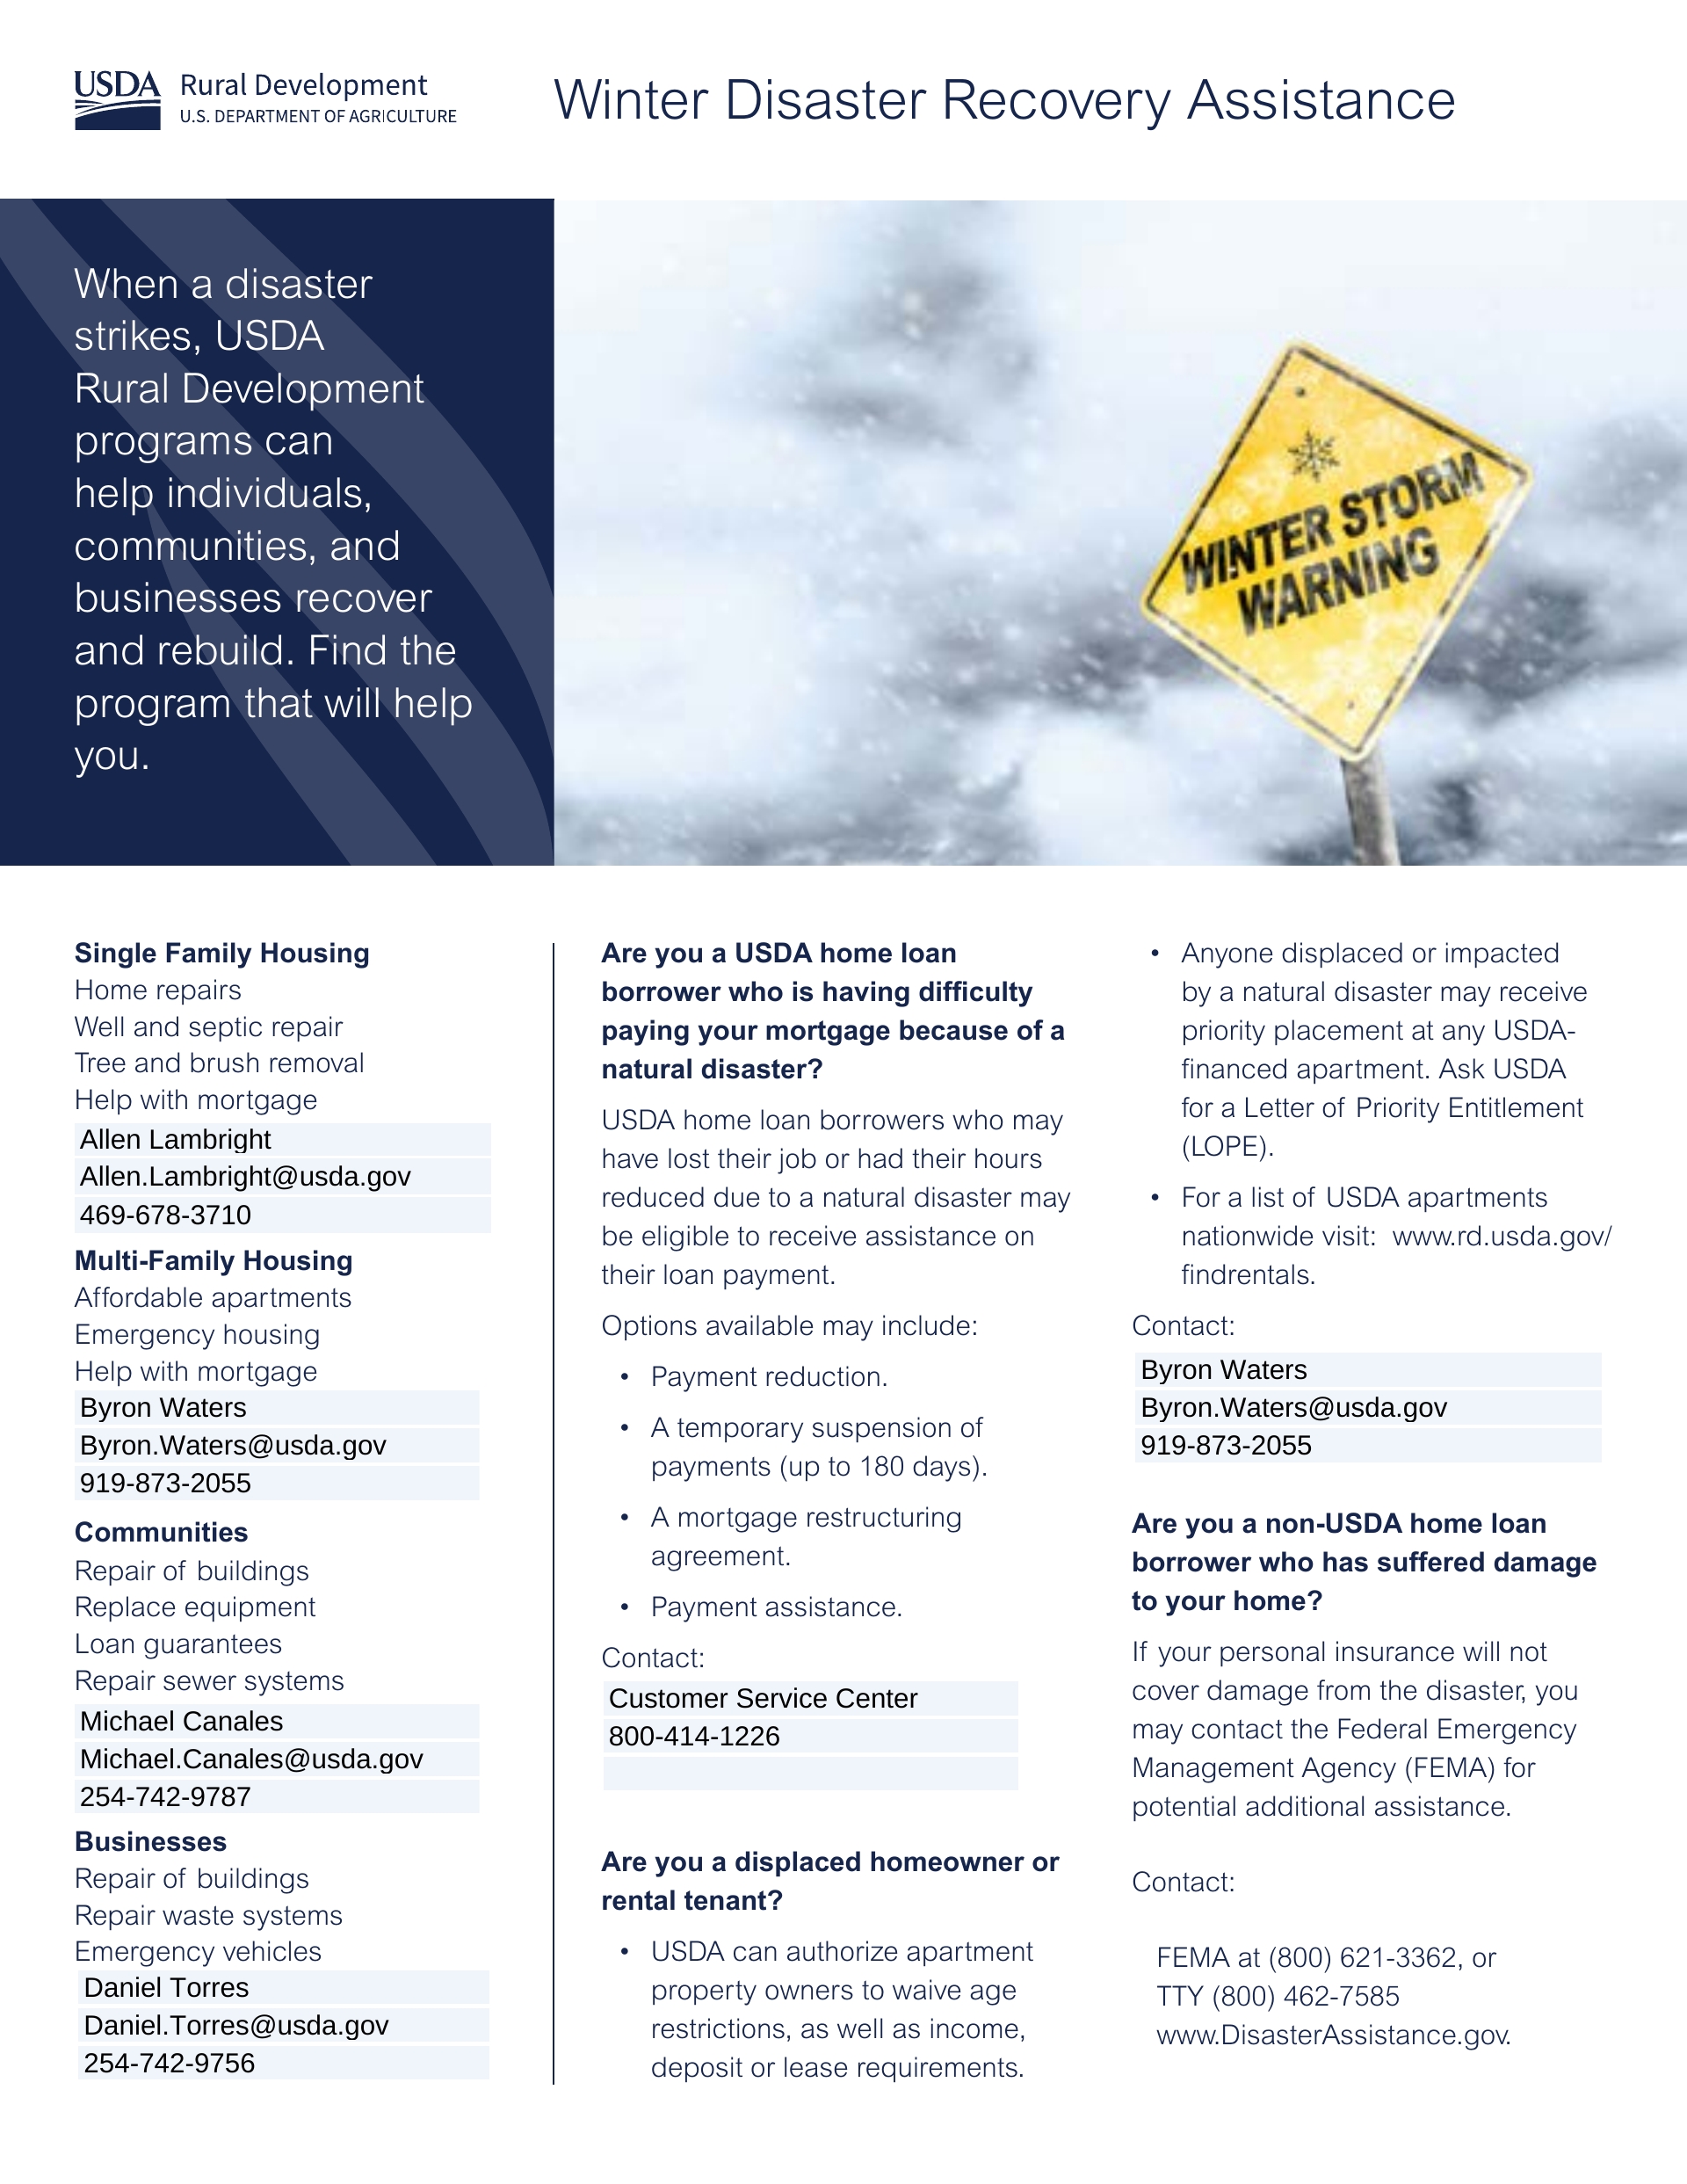 Winter Disaster Recovery Fact Sheet 1.0